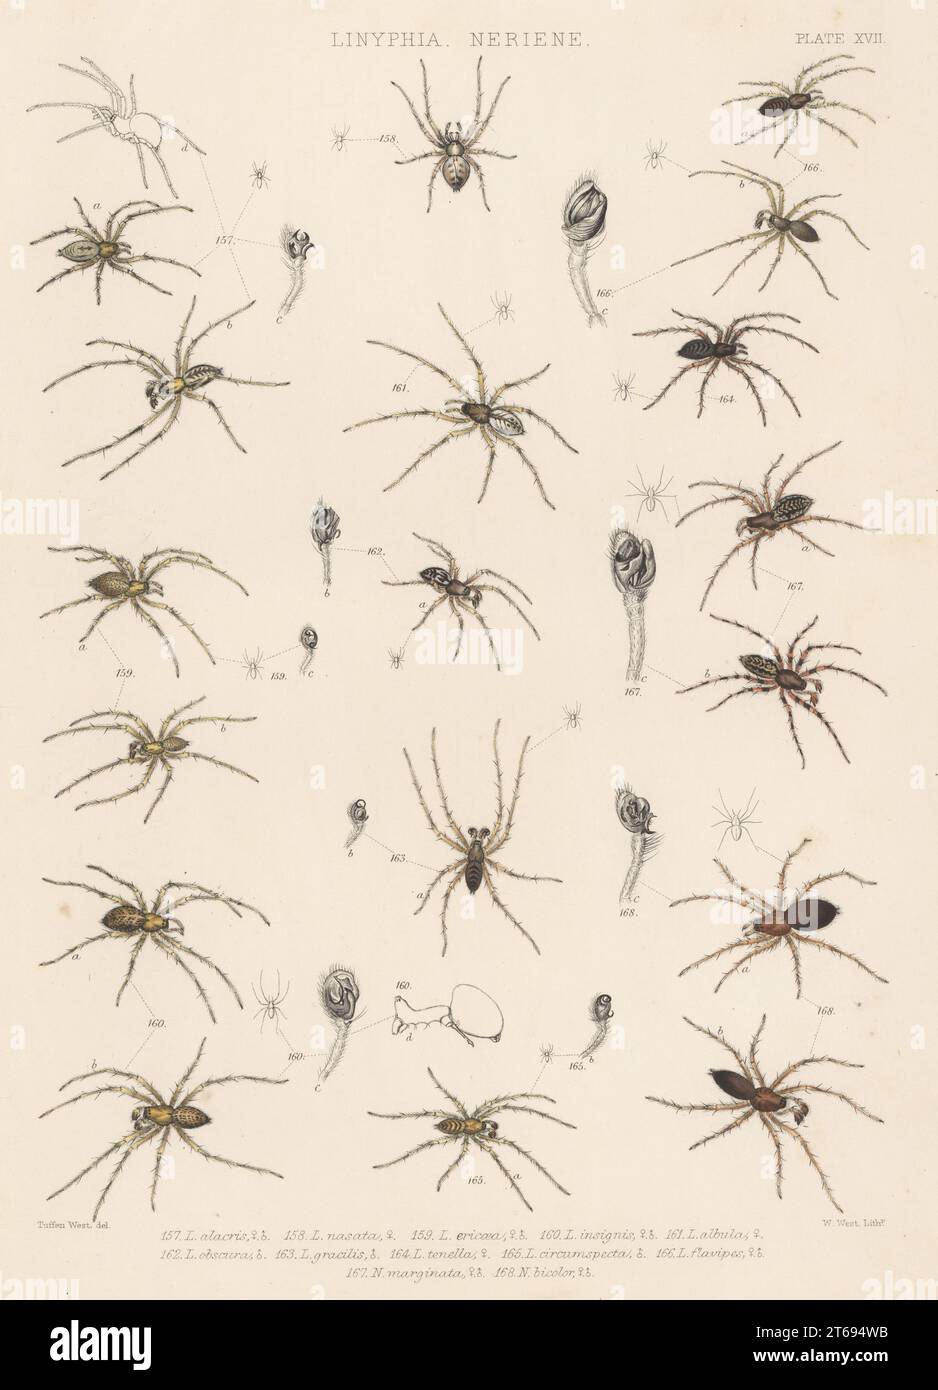 Dwarf spider, Lepthyphantes alacris 157, Linyphia nasata 158, Lepthyphantes ericaeus 159, sheetweb spider, Helophora insignis 160, Neriene peltata 161, Lepthyphantes obscurus 162, Bathyphantes gracilis 163, 165, Kaestneria pullata 164, Lepthyphantes flavipes 166, Neriene clathrata 167, and Centromerita bicolor 168. Handcoloured lithograph by W. West after Tuffen West from John Blackwalls A History of the Spiders of Great Britain and Ireland, Ray Society, London, 1861. Stock Photo